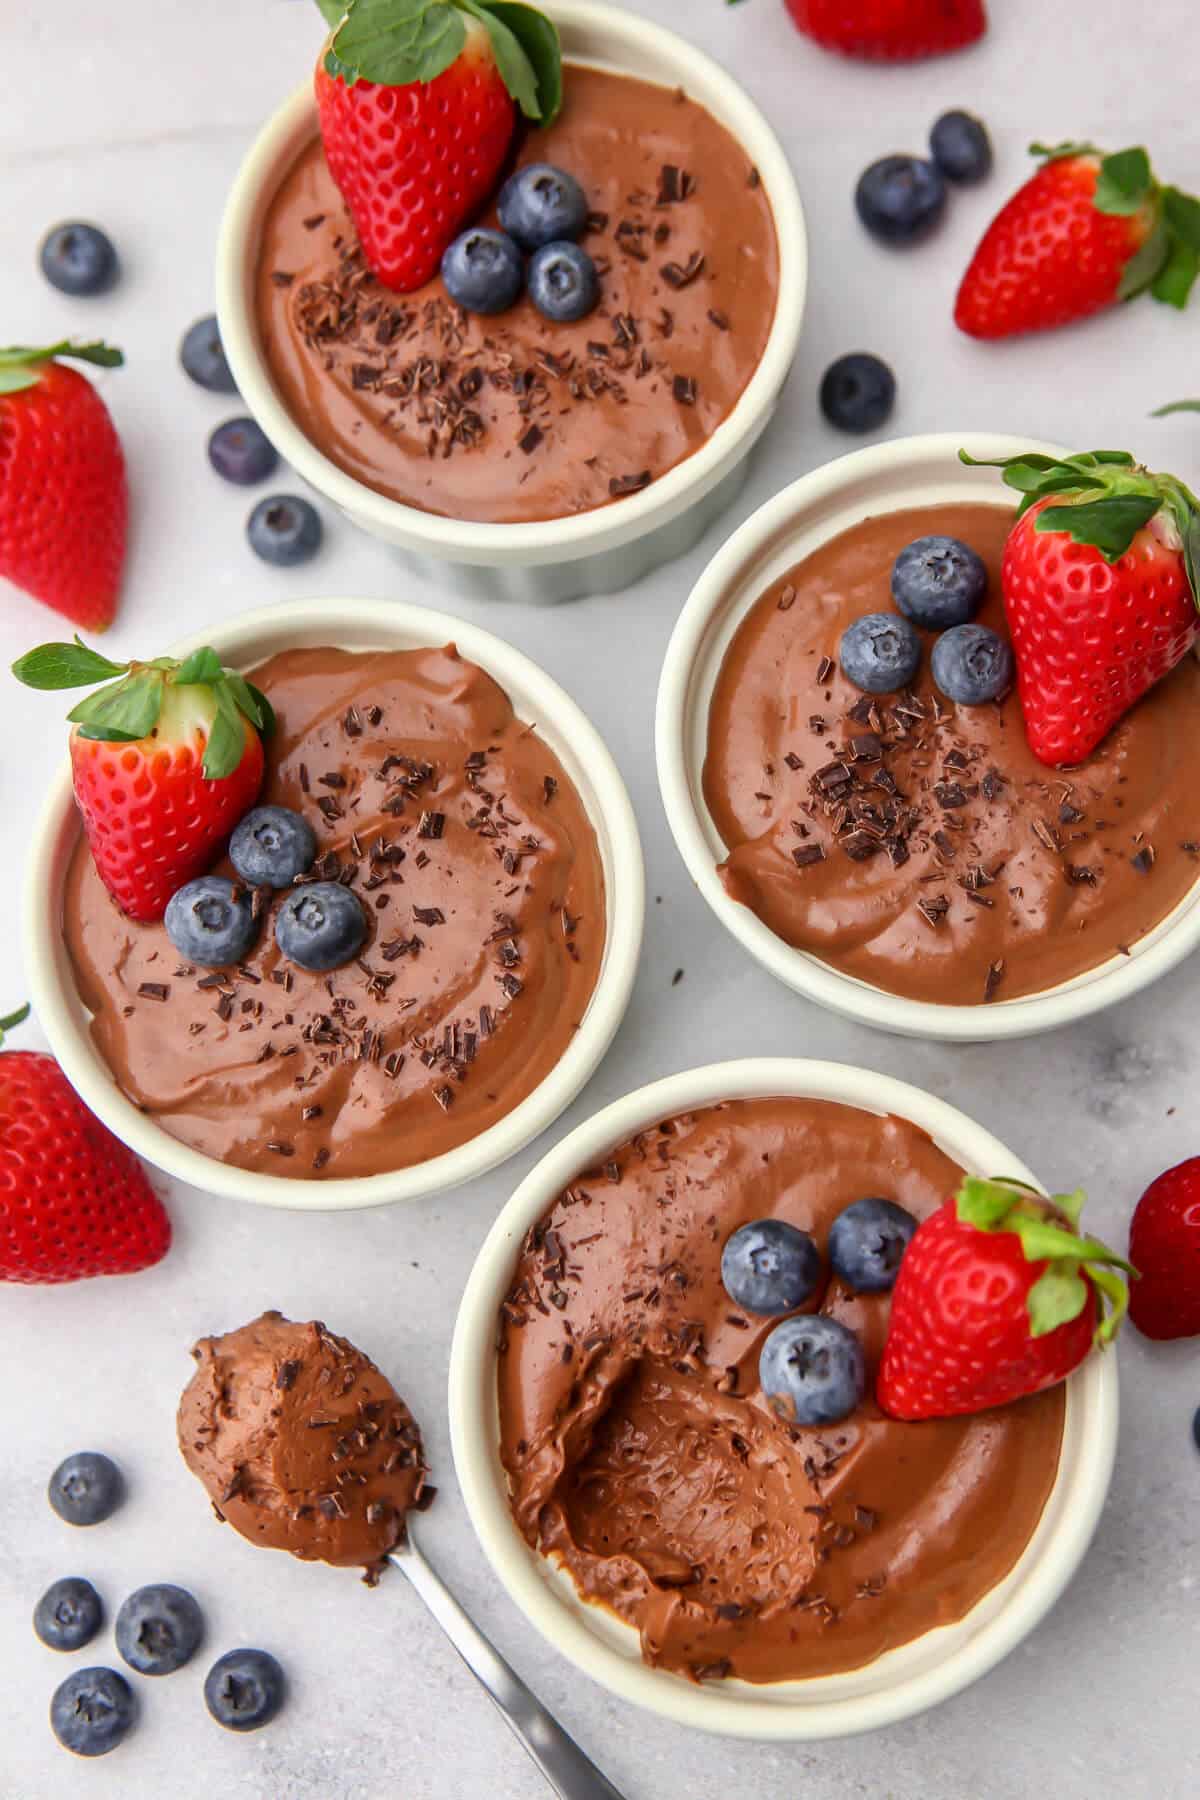 A top view of tofu chocolate mousse with berries on top with a spoonful taken out of one cup.